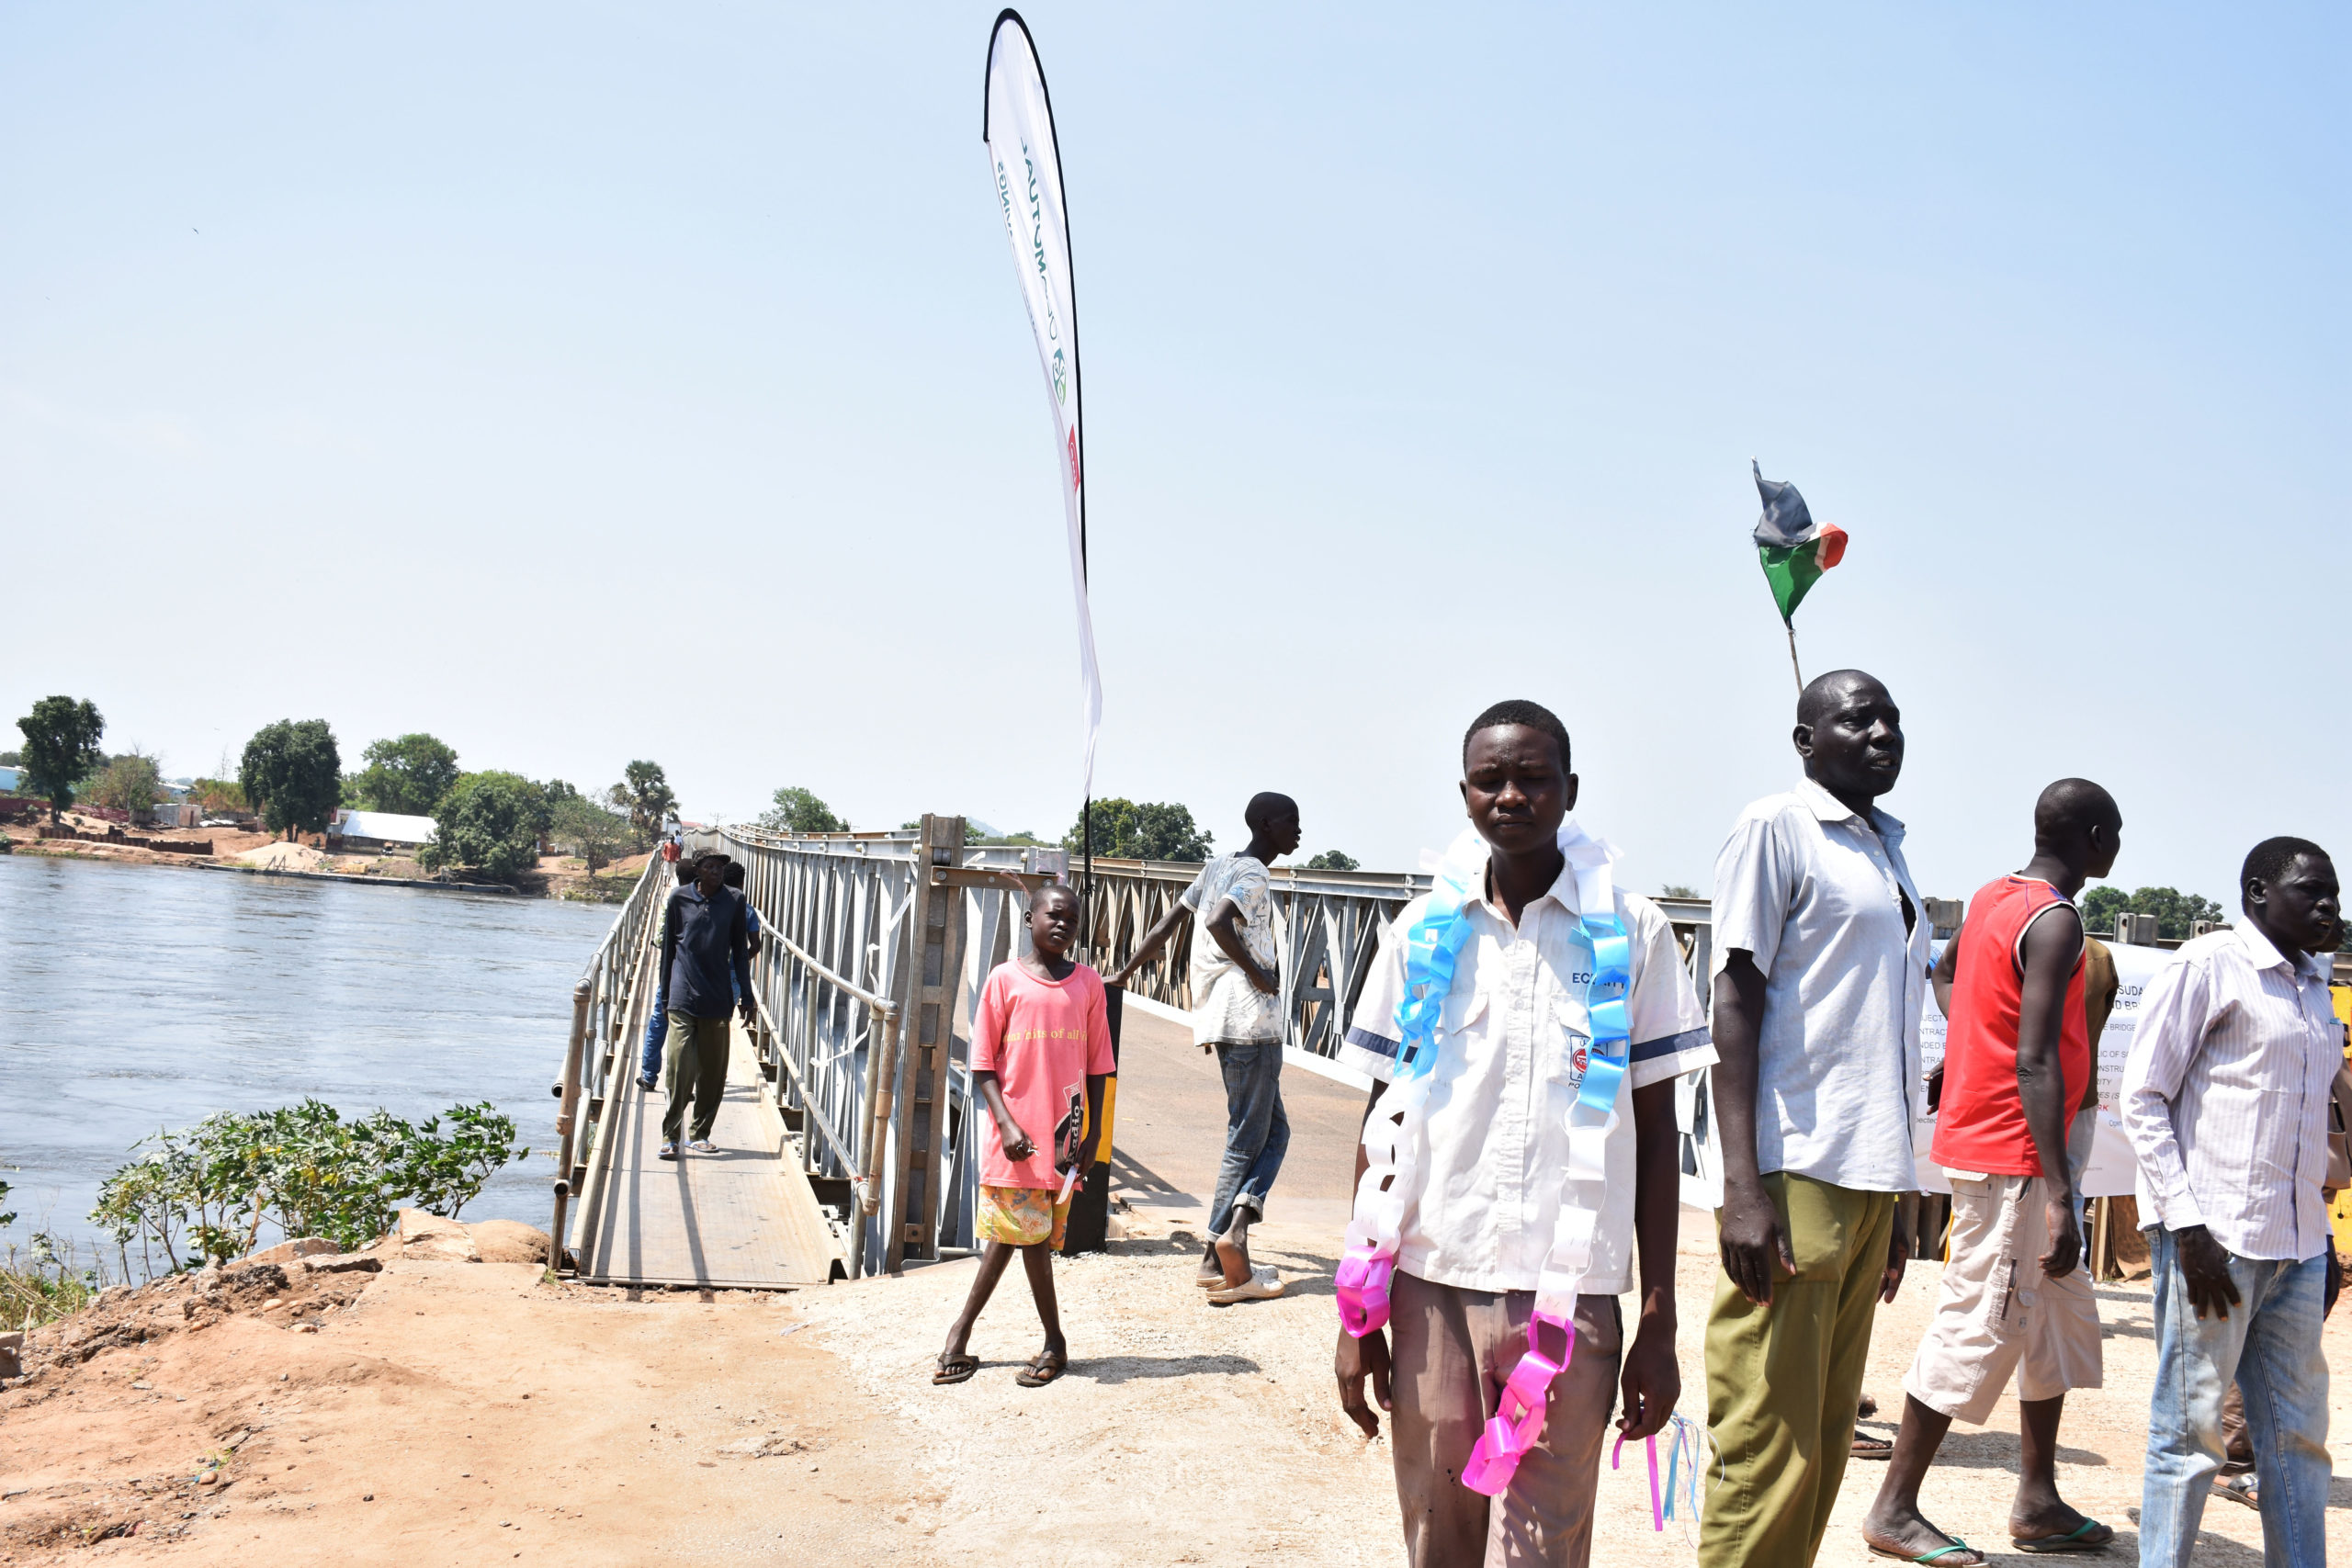 Relief for business as Juba Nile Bridge handed back to govt